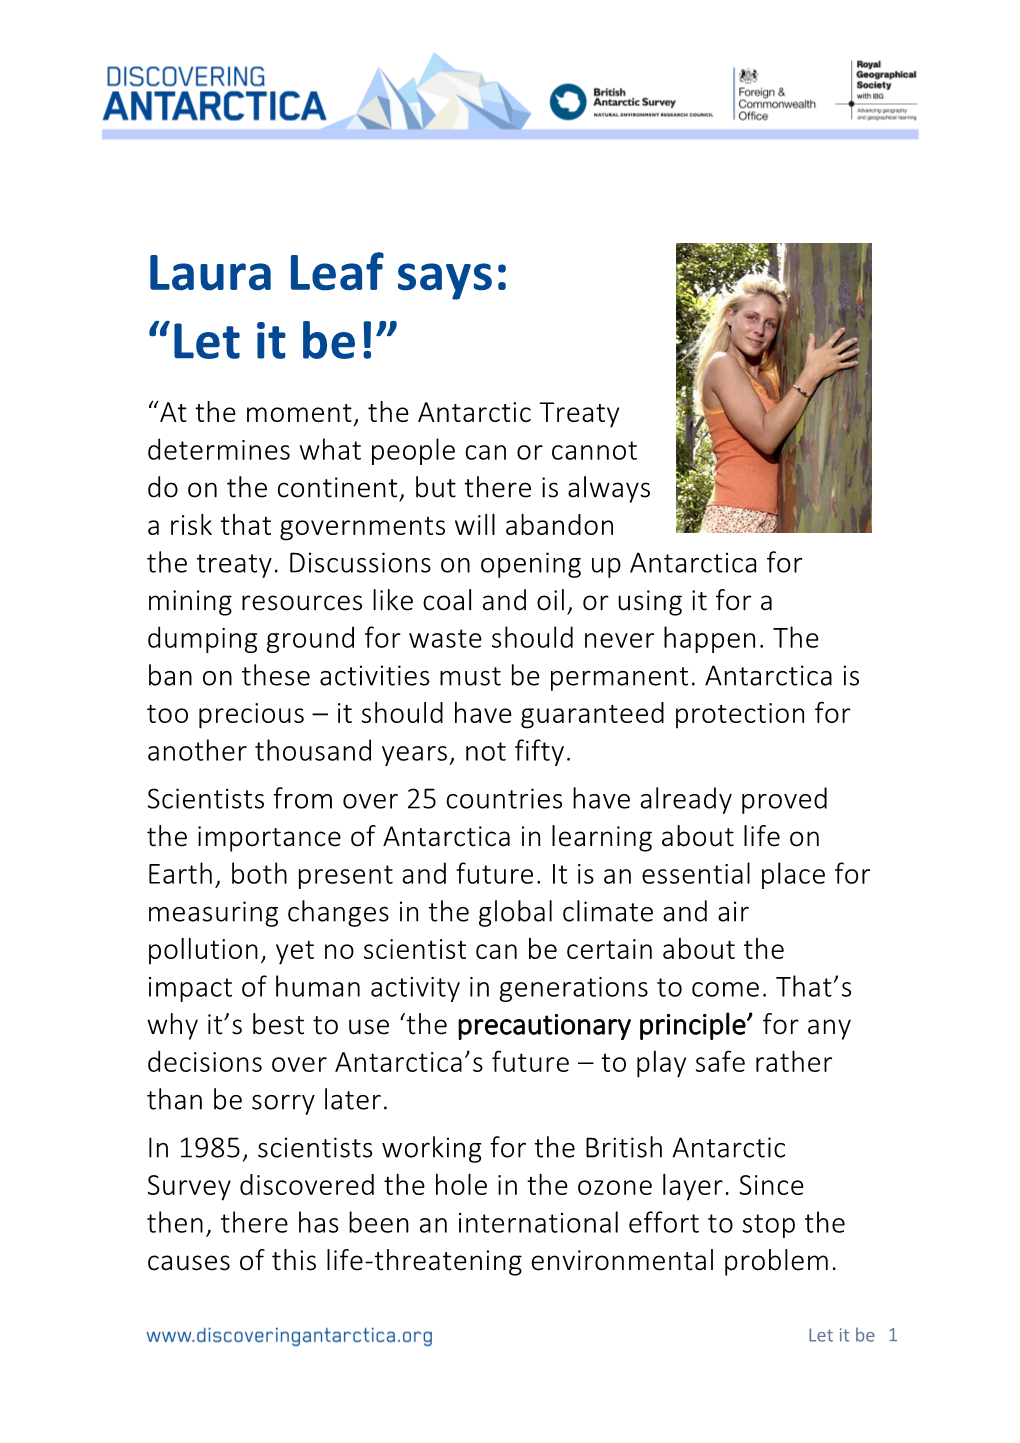 Laura Leaf Says: Let It Be!